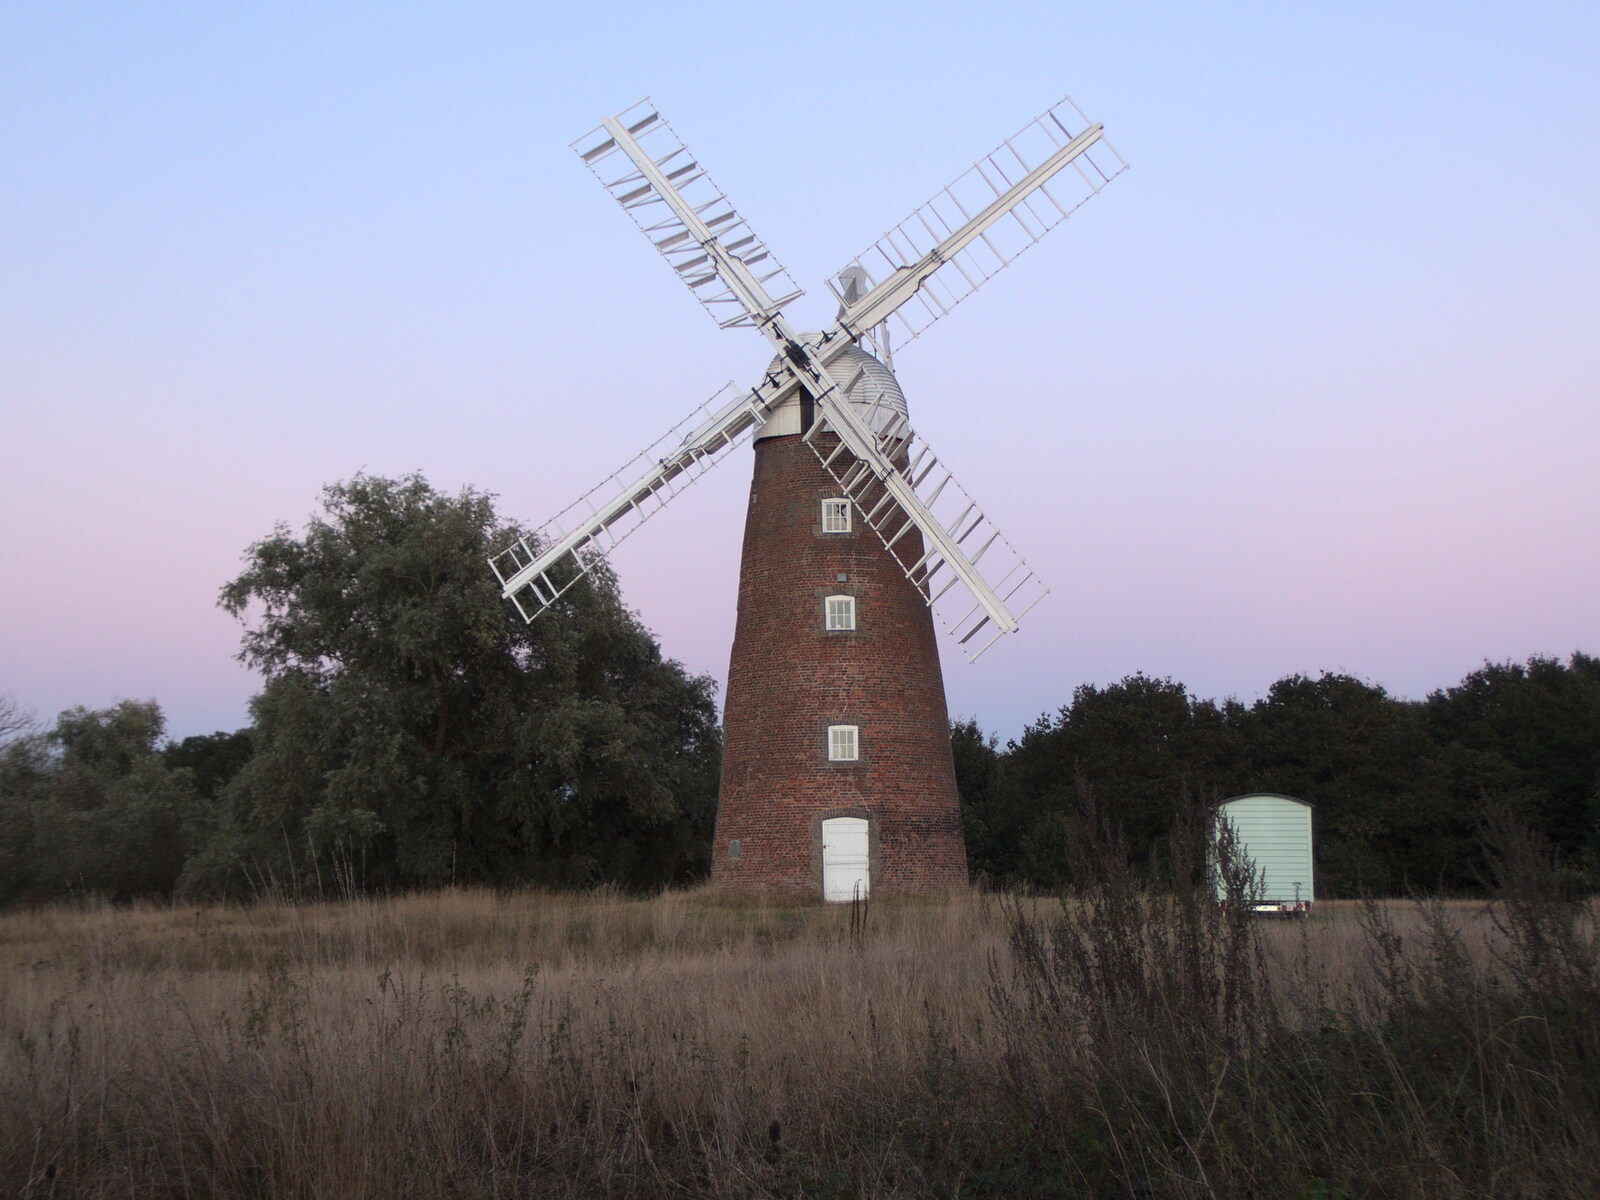 Billingford Windmill in the dusk from BSCC at Ampersand and Birthday Lego at Jarrold's, Norwich, Norfolk - 25th September 2021